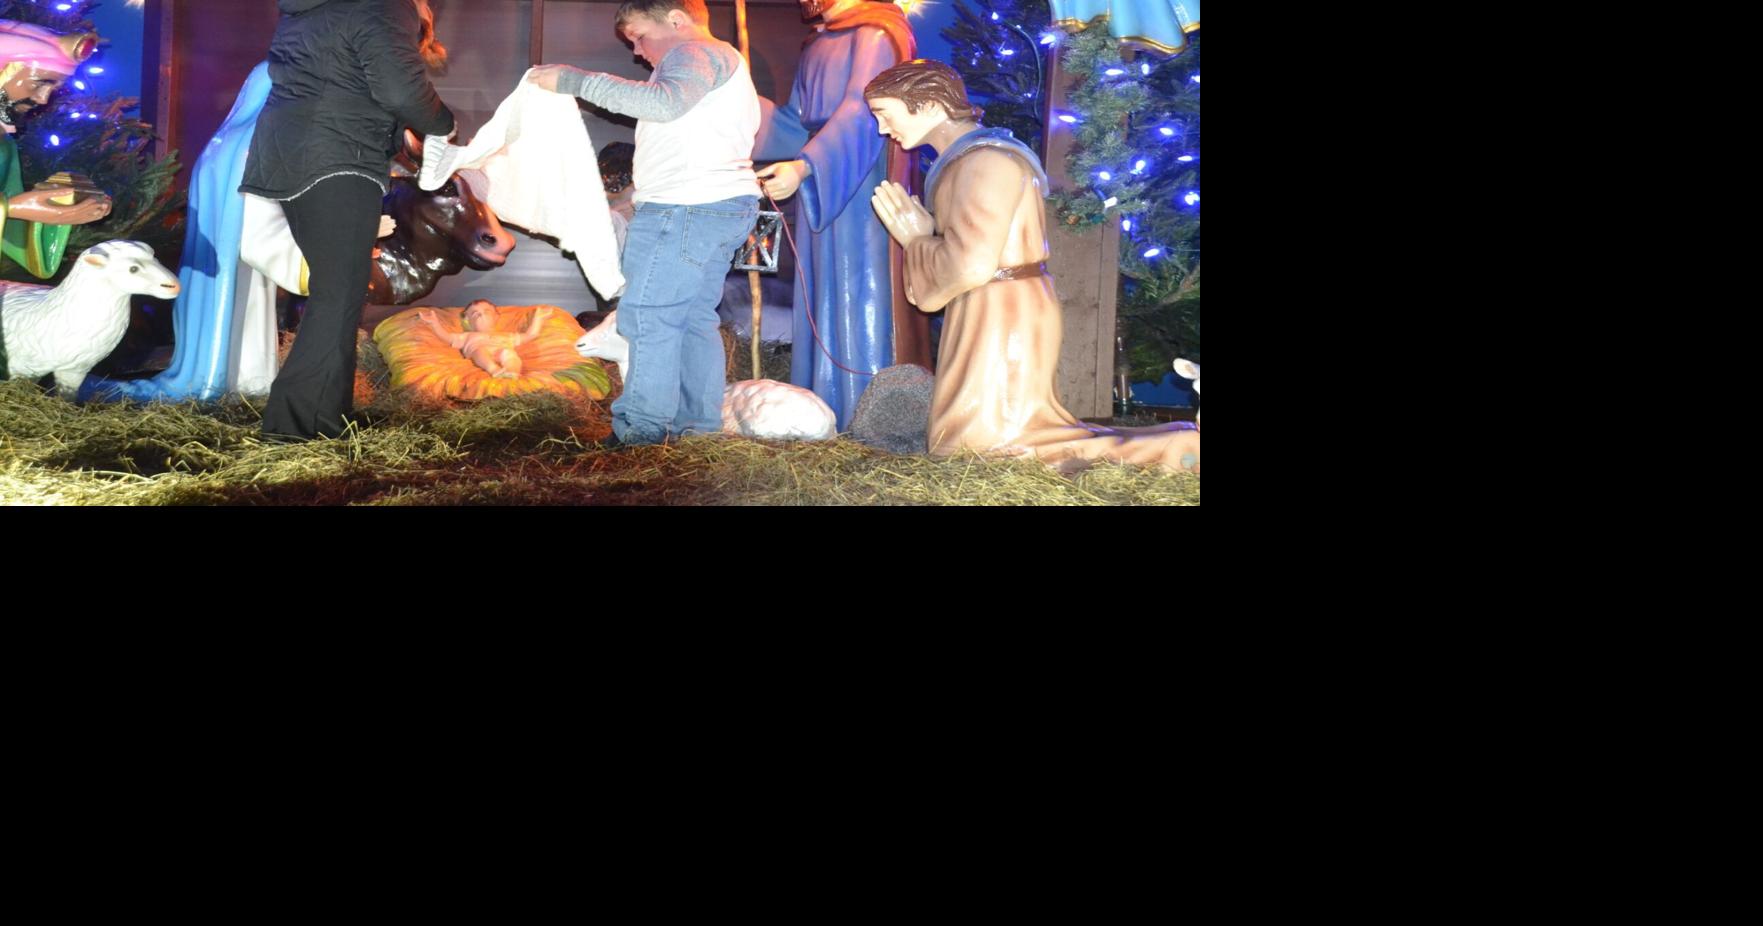 Mt. Pleasant Nativity on display | Multimedia | dailycourier.com